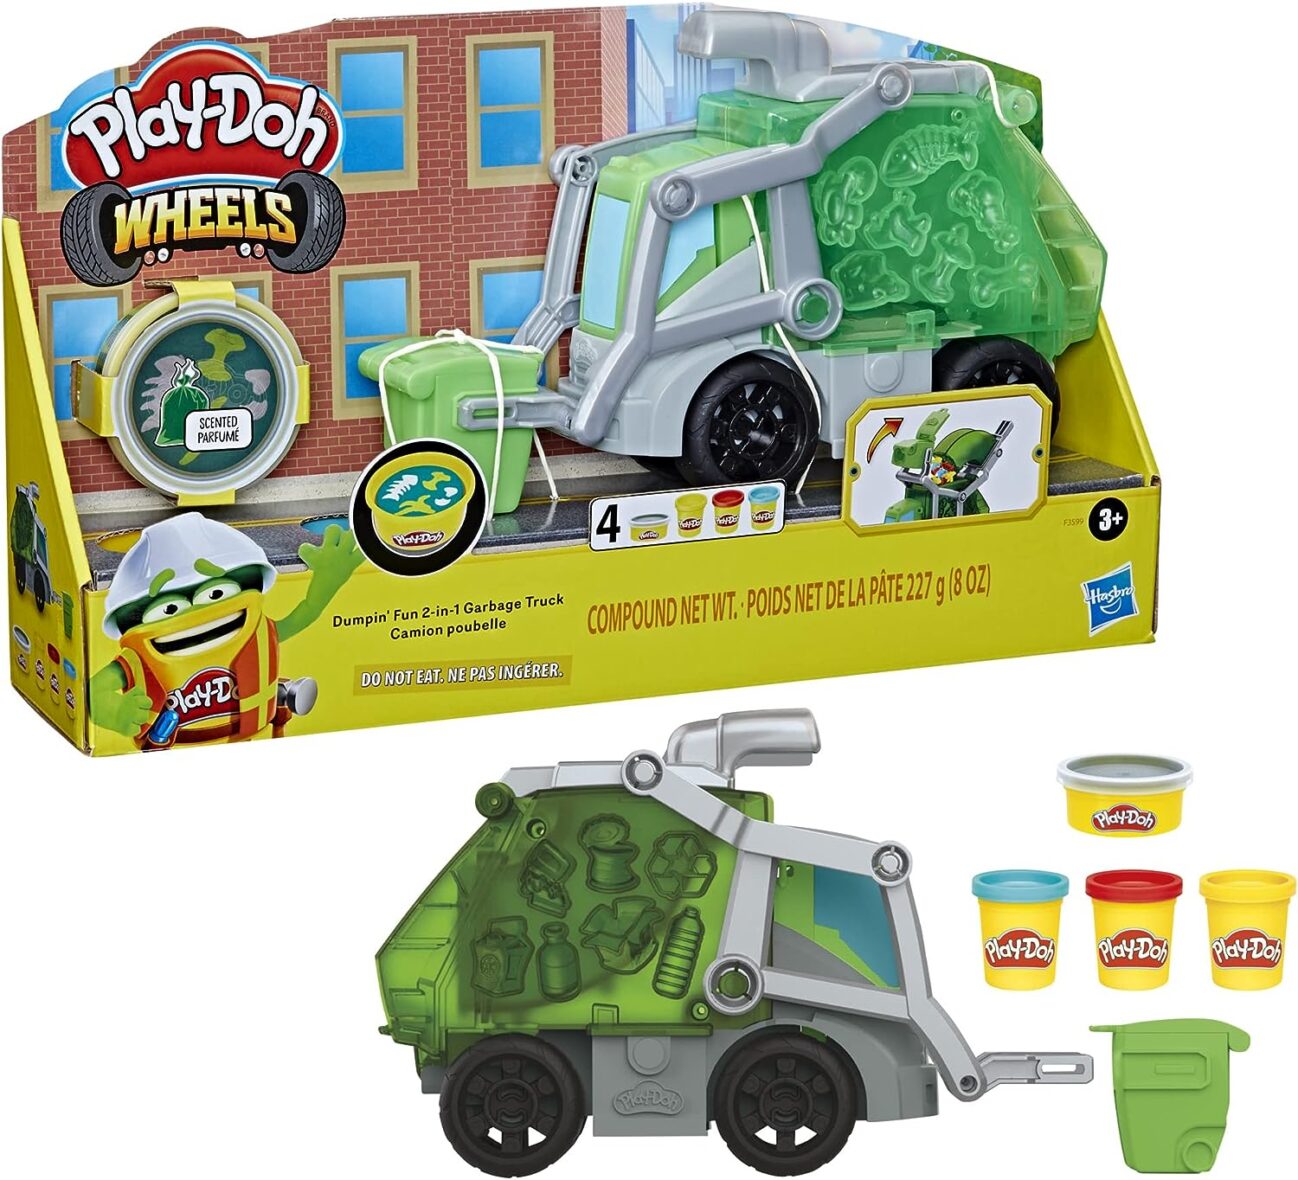 Play-Doh Wheels Dumpin’ Fun 2-in-1 Garbage Truck Toy, with Stinky Scented Garbage Compound and 3 Additional Cans, Preschool Toys for 3 Year Old Boys and Girls and Up, Non-Toxic